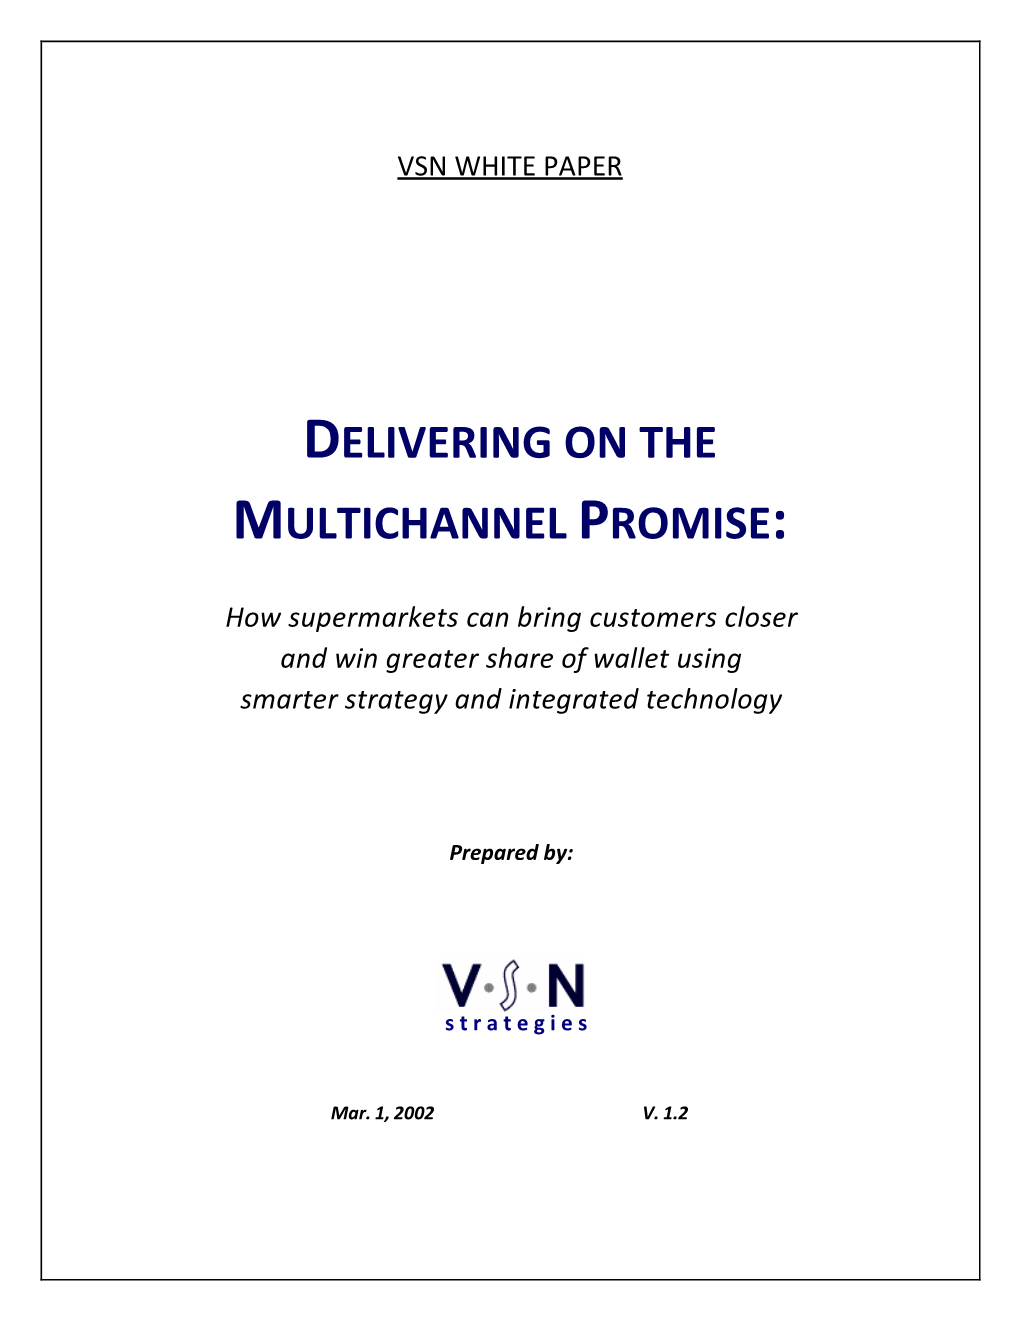 Delivering on the Multichannel Promise